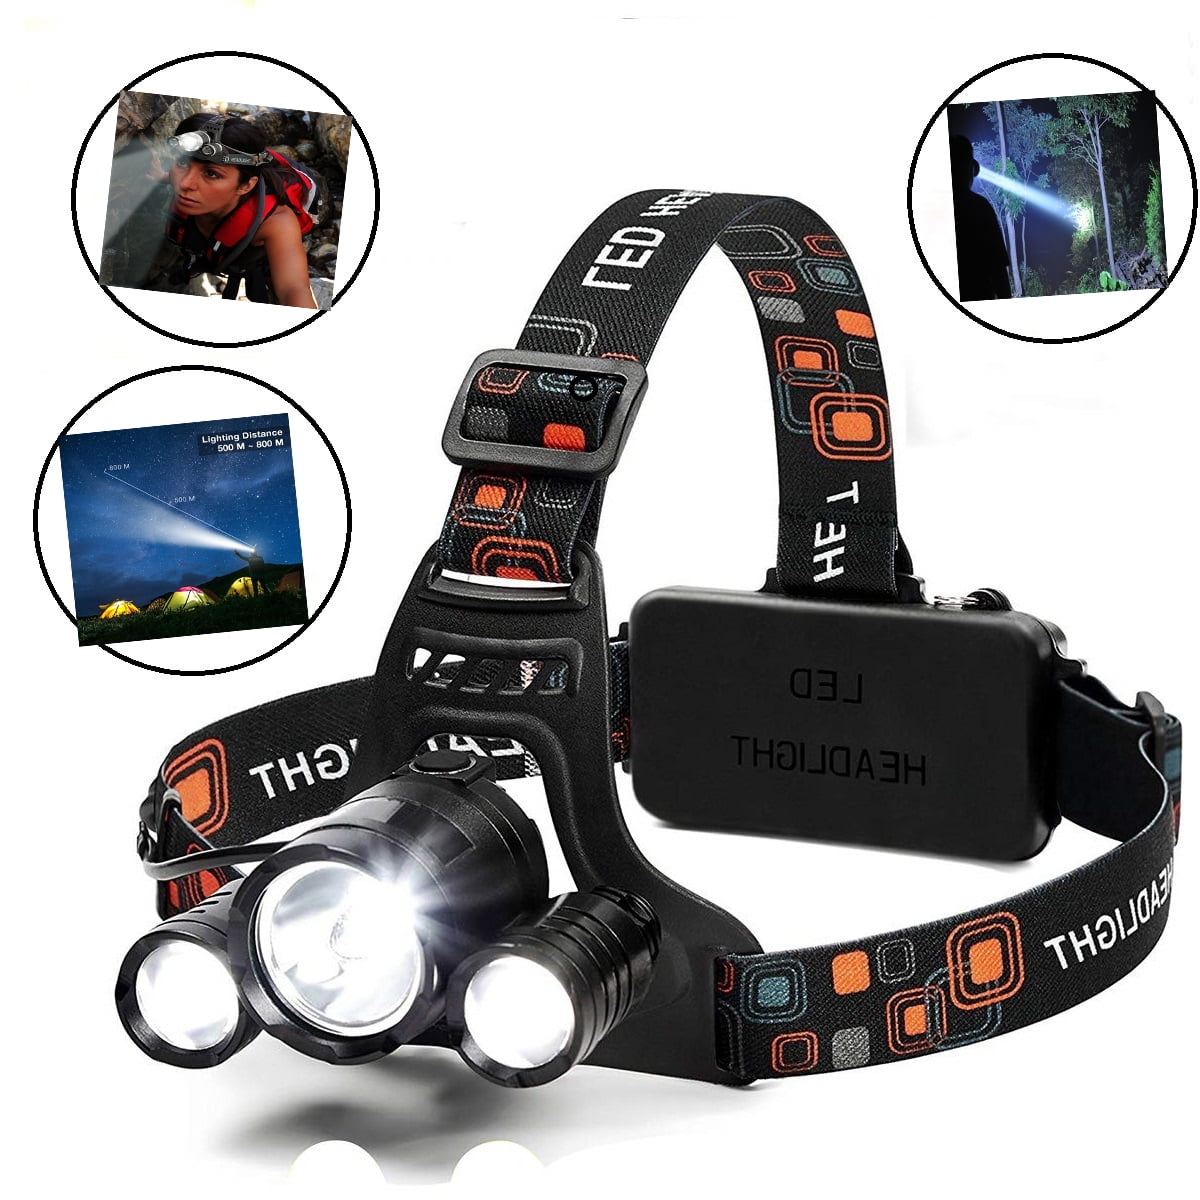 USB Work Light 1200000LM T6 LED Headlamp Headlight Rechargeable Torch A5M8 